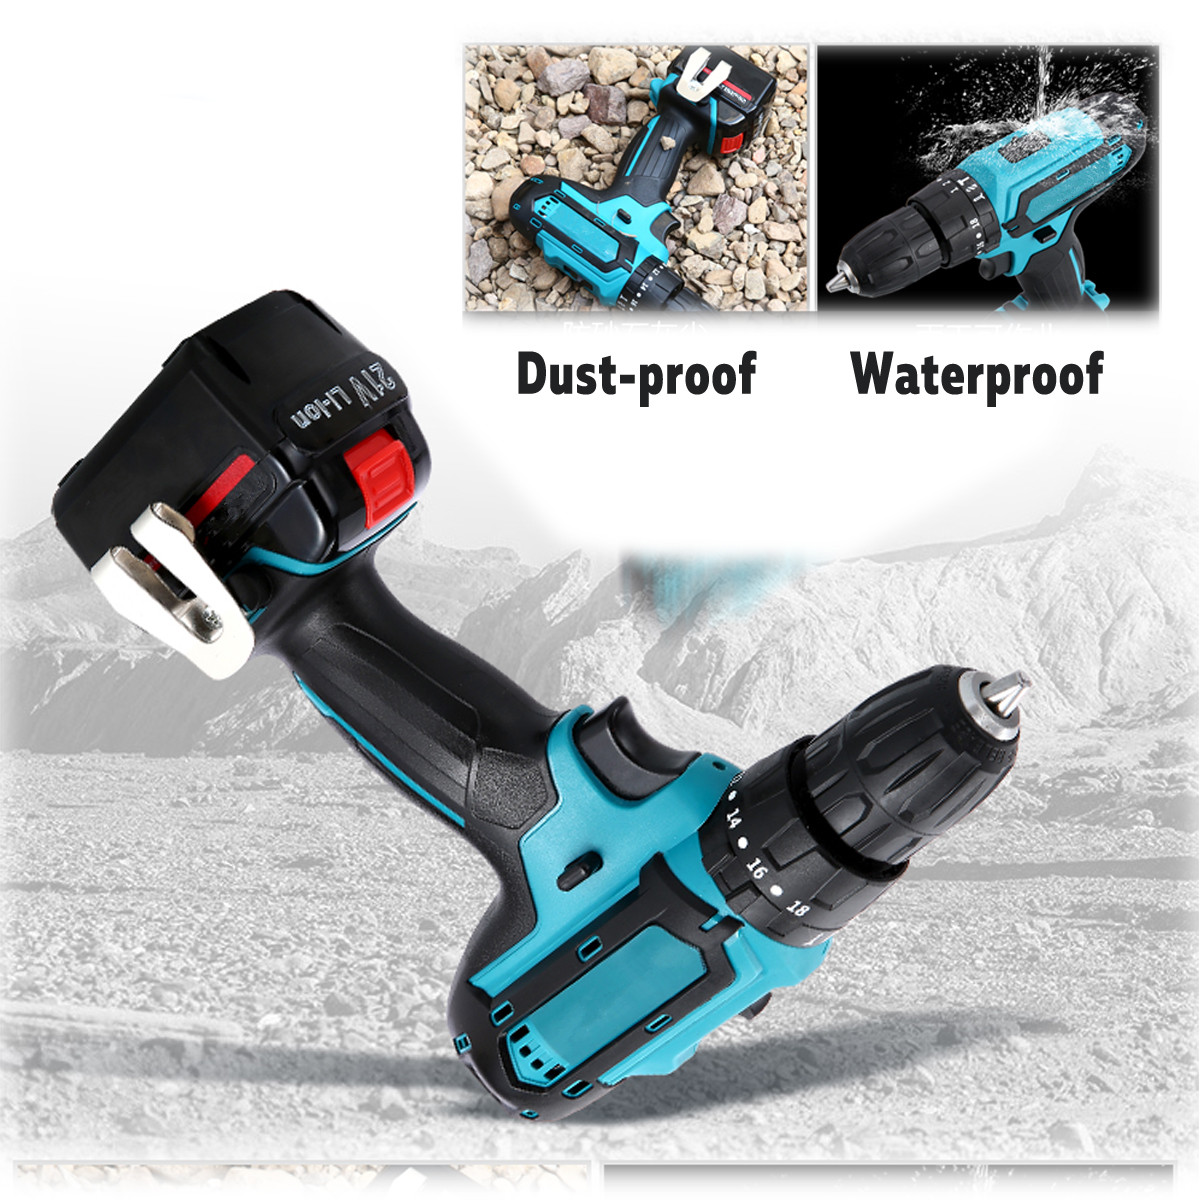 12V-Cordless-Electric-Impact-Drill-Multi-function-Hand-Hammer-Screwdriver-Lithium-Battery-Rechargabl-1452371-6